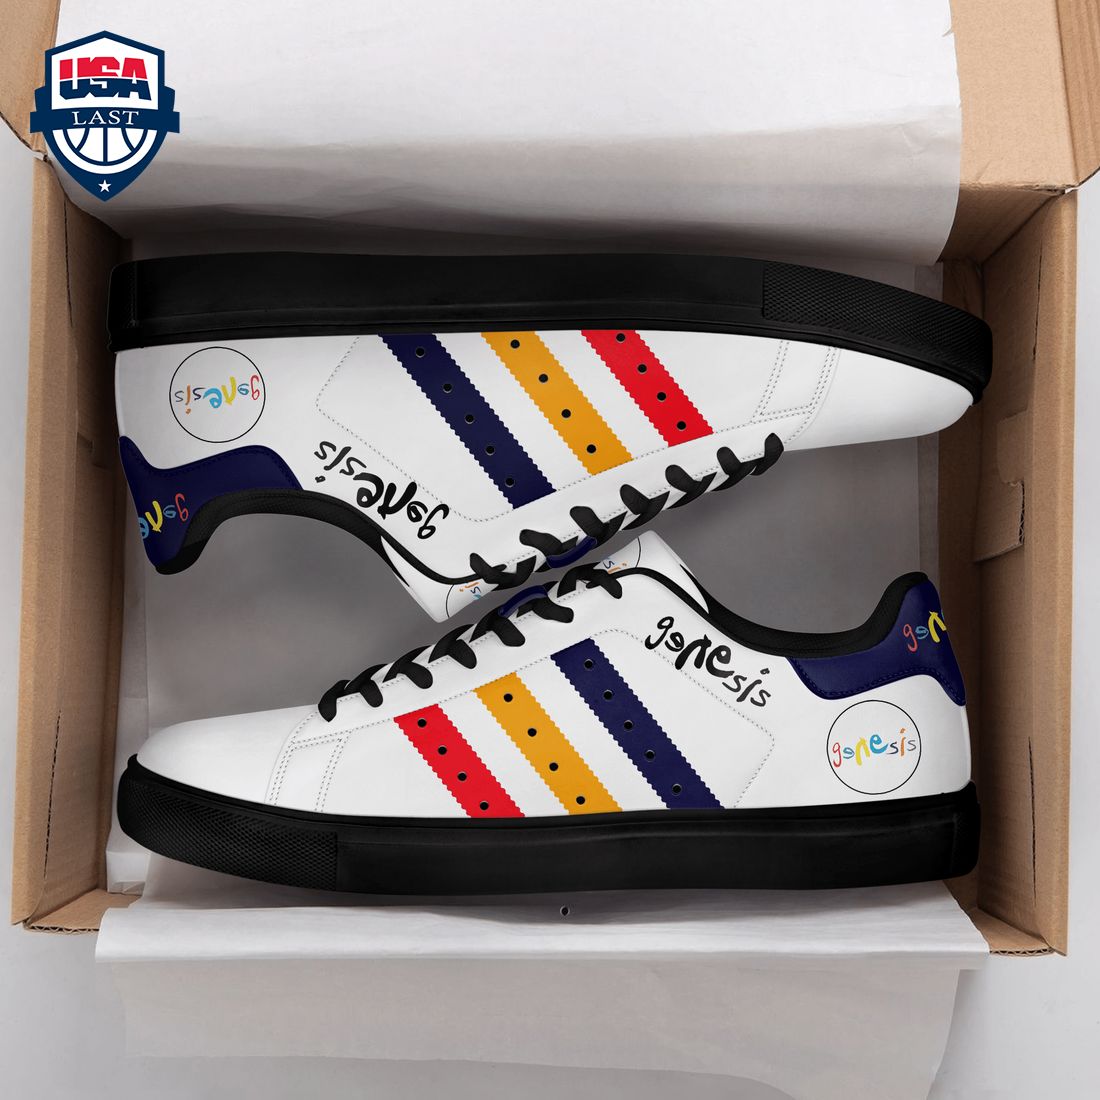 genesis-navy-yellow-red-stripes-stan-smith-low-top-shoes-1-Hv8S6.jpg